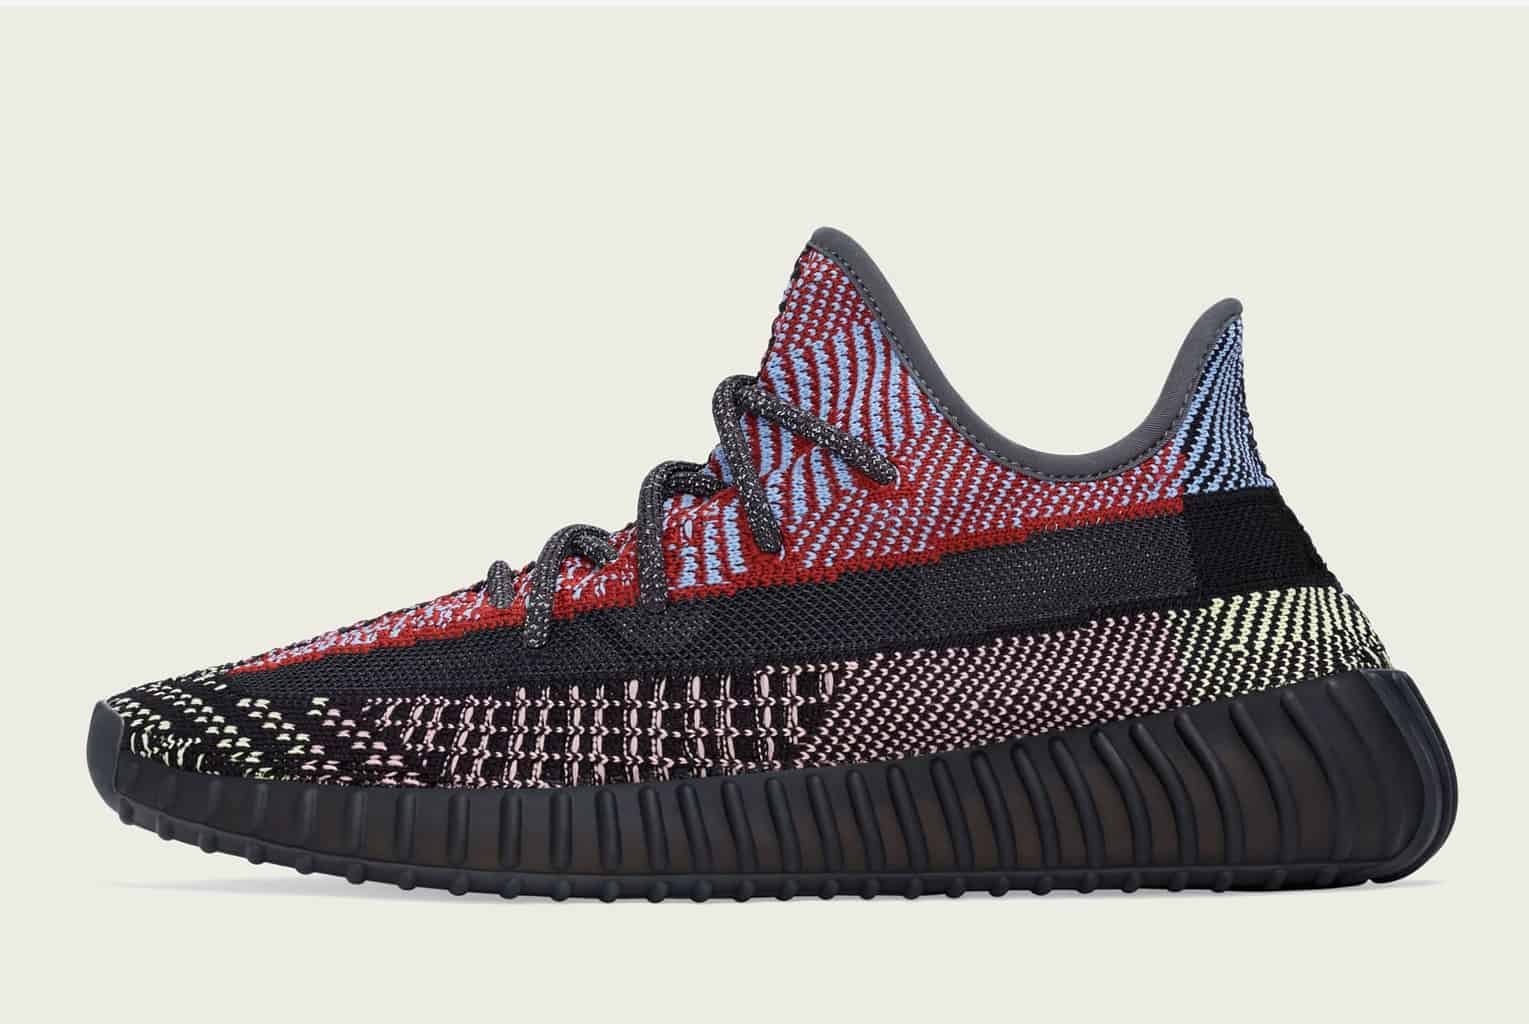 Yeezy Boost 350 V2s To Be Cancelled 